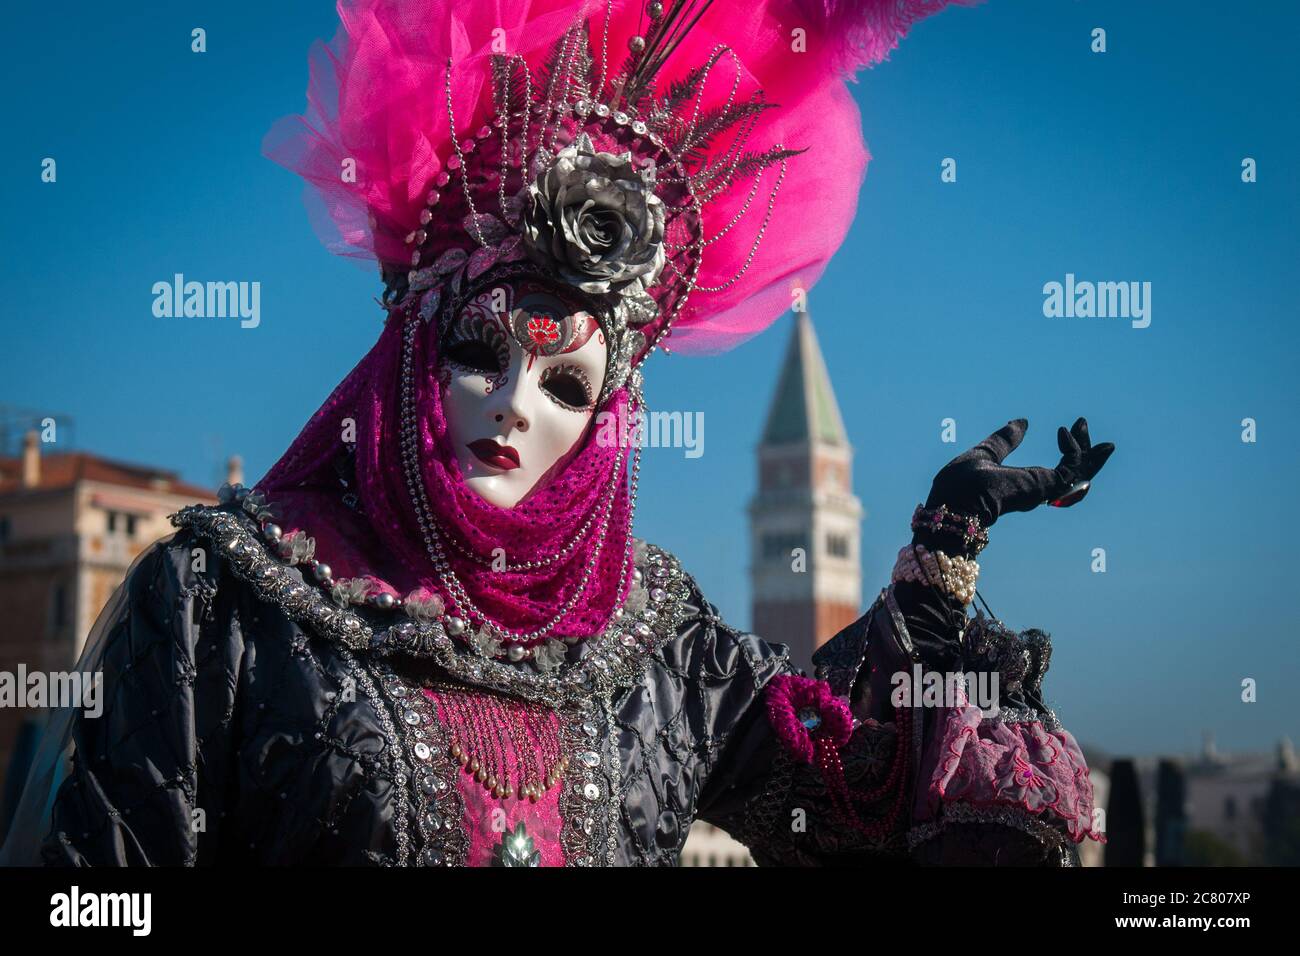 VENICE, ITALY - 28 FEBRUARY 2019: a purple dame costume during Venice Carnival poses with San Marco in background Stock Photo